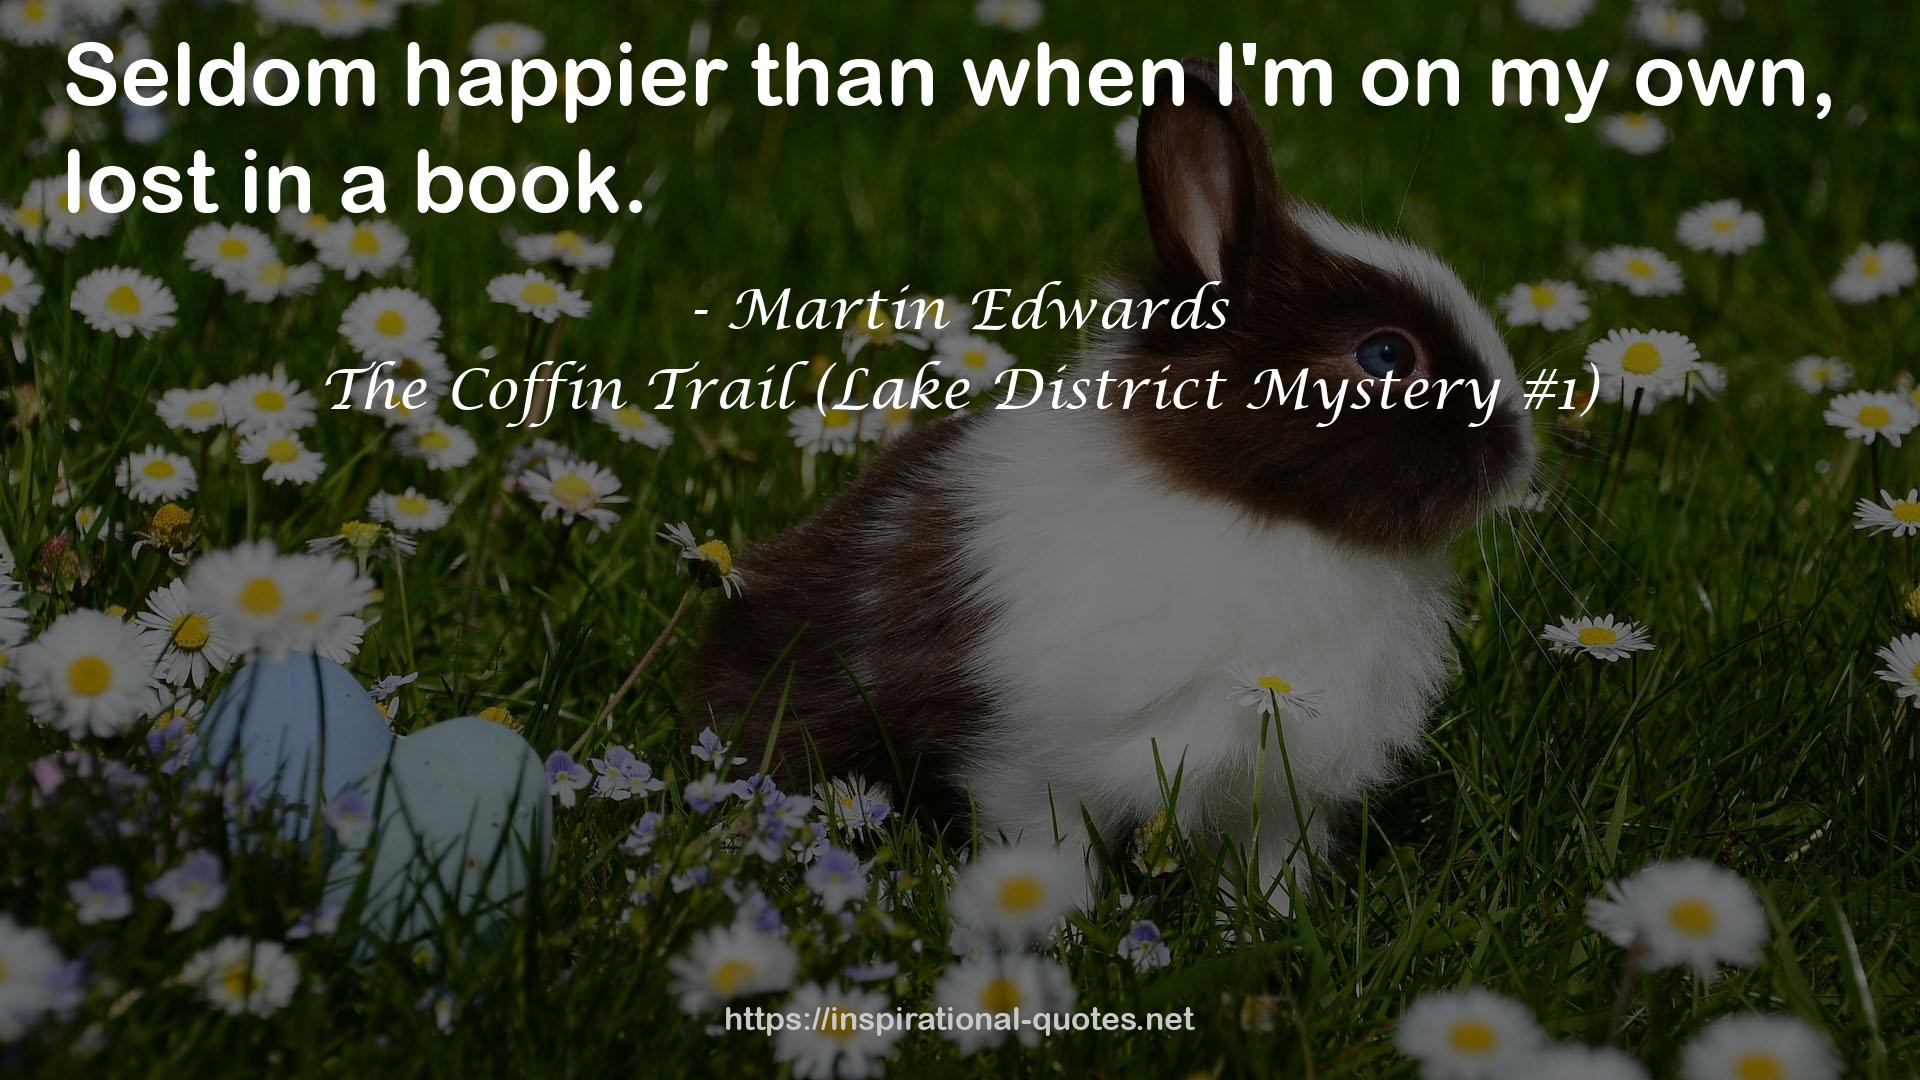 The Coffin Trail (Lake District Mystery #1) QUOTES